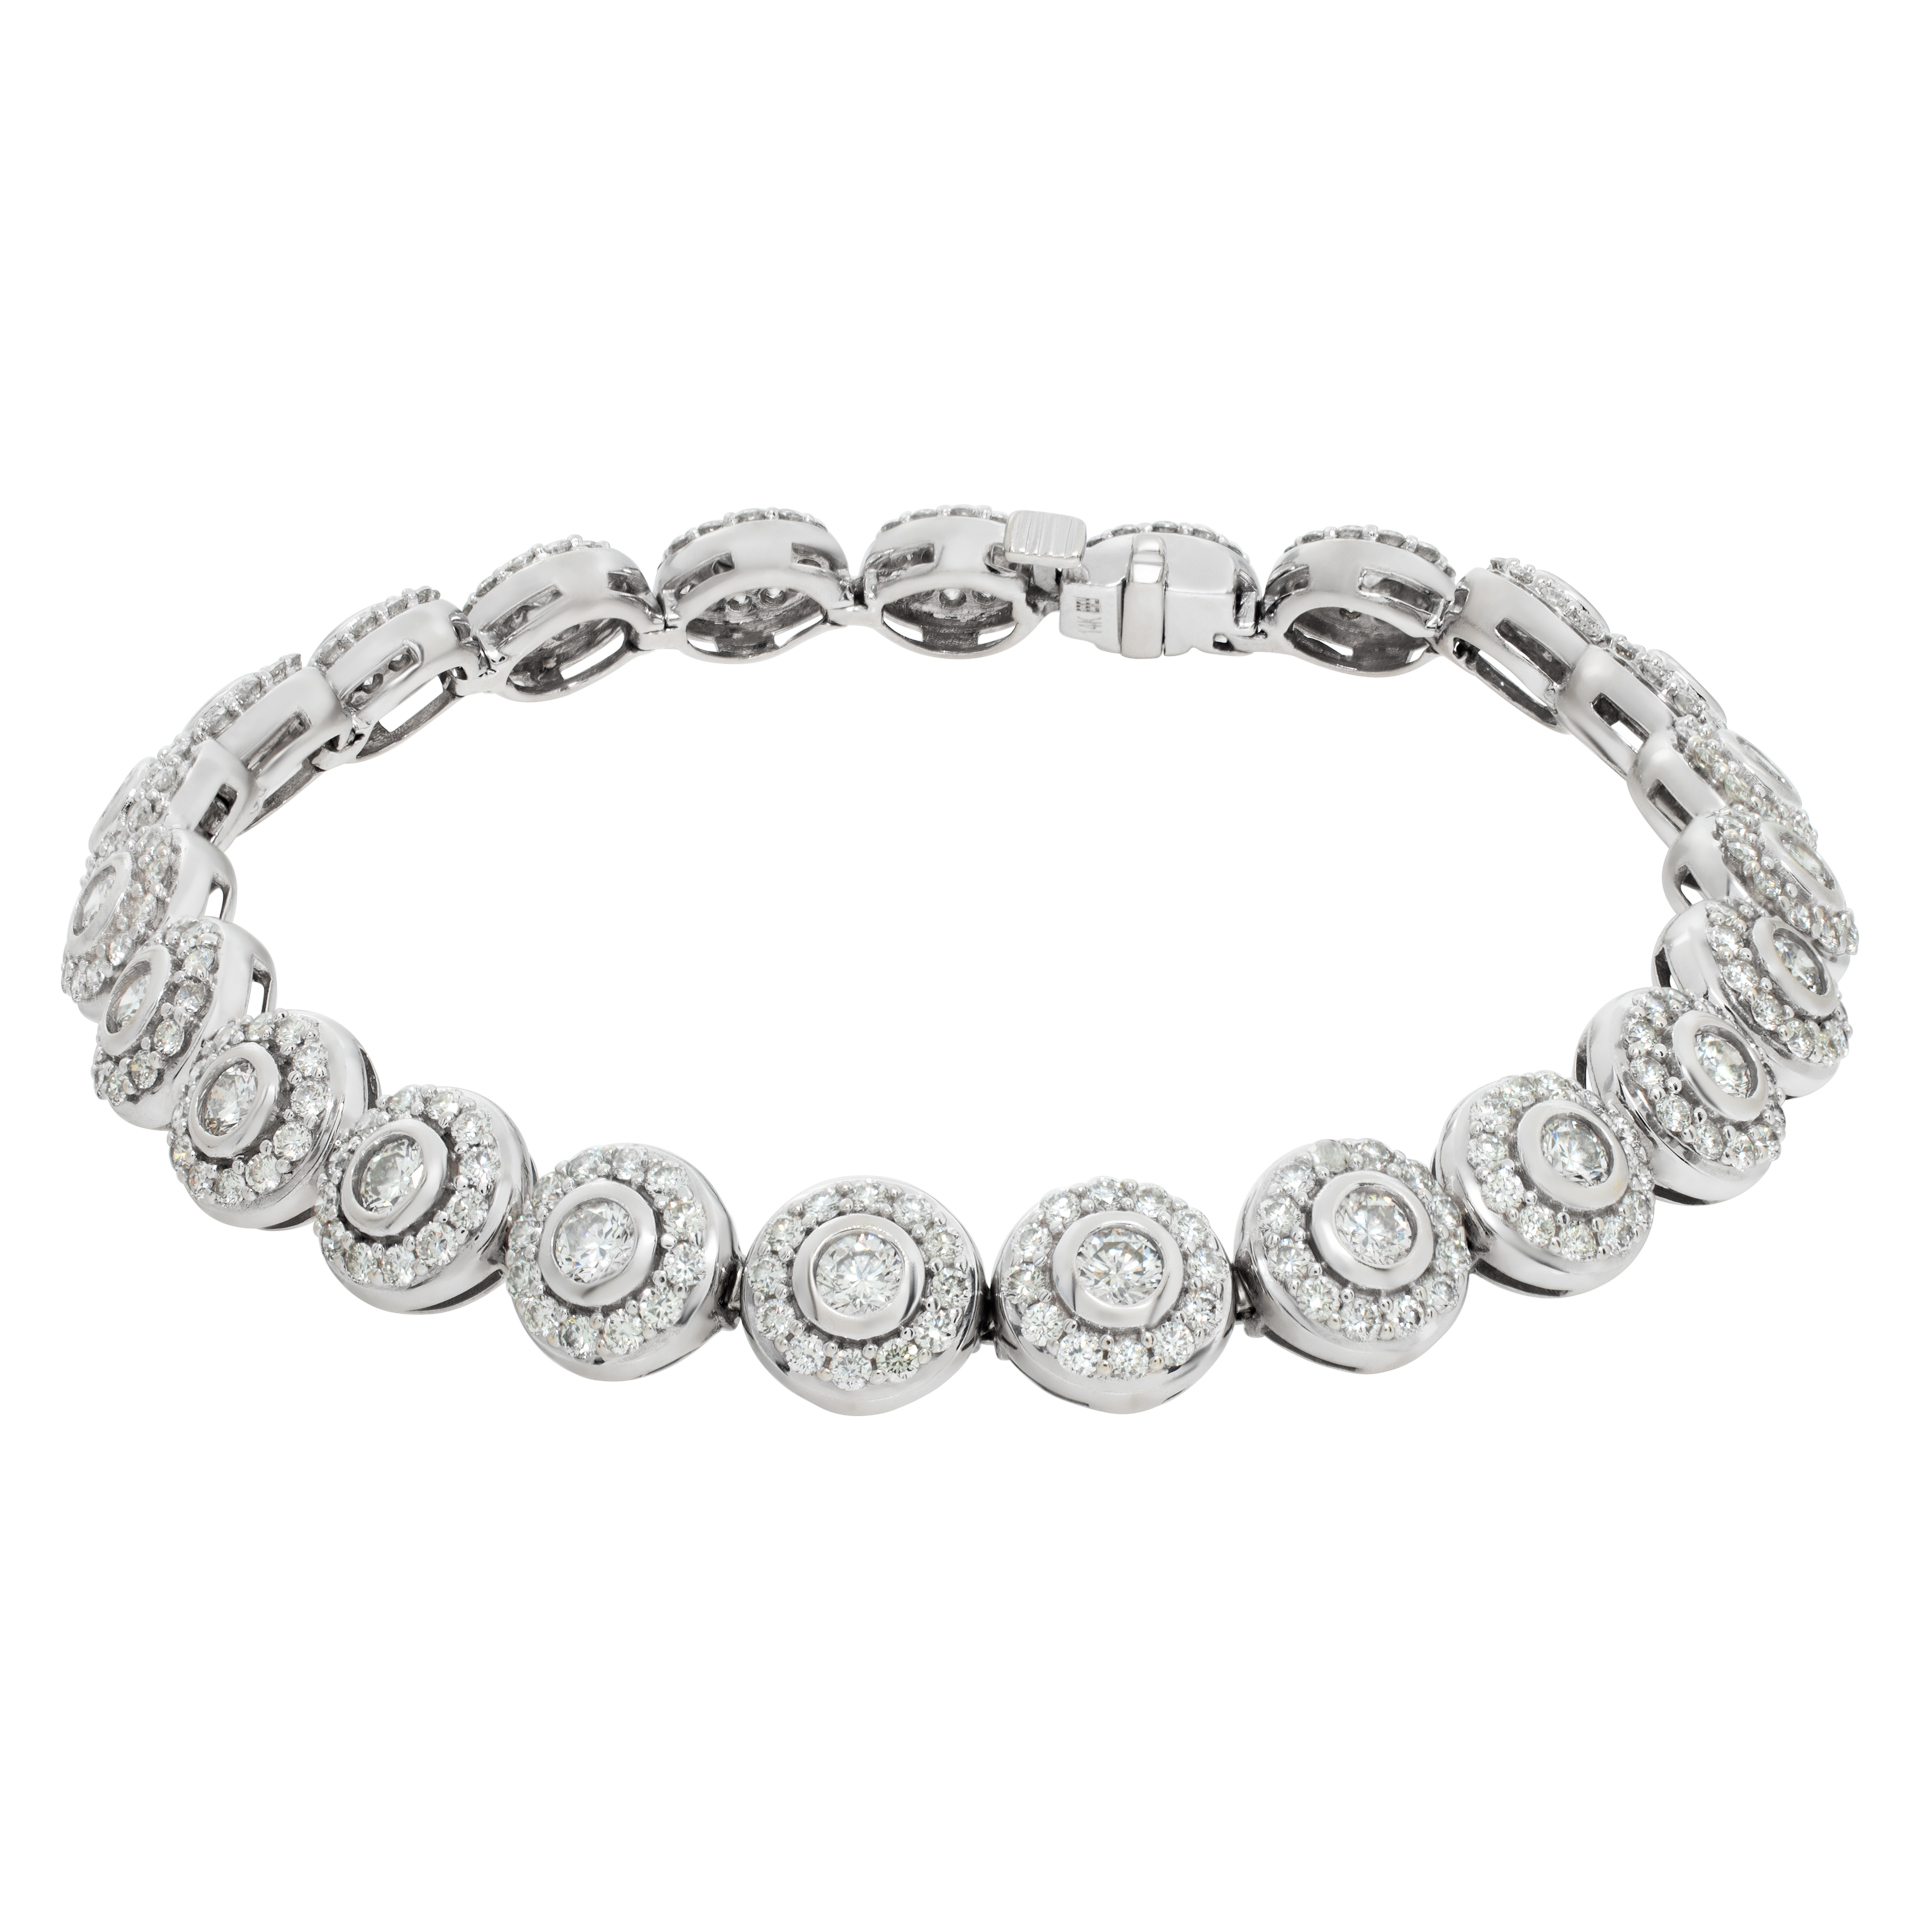 Circle bracelet in 14k white gold with approx 3.70 carats in diamonds